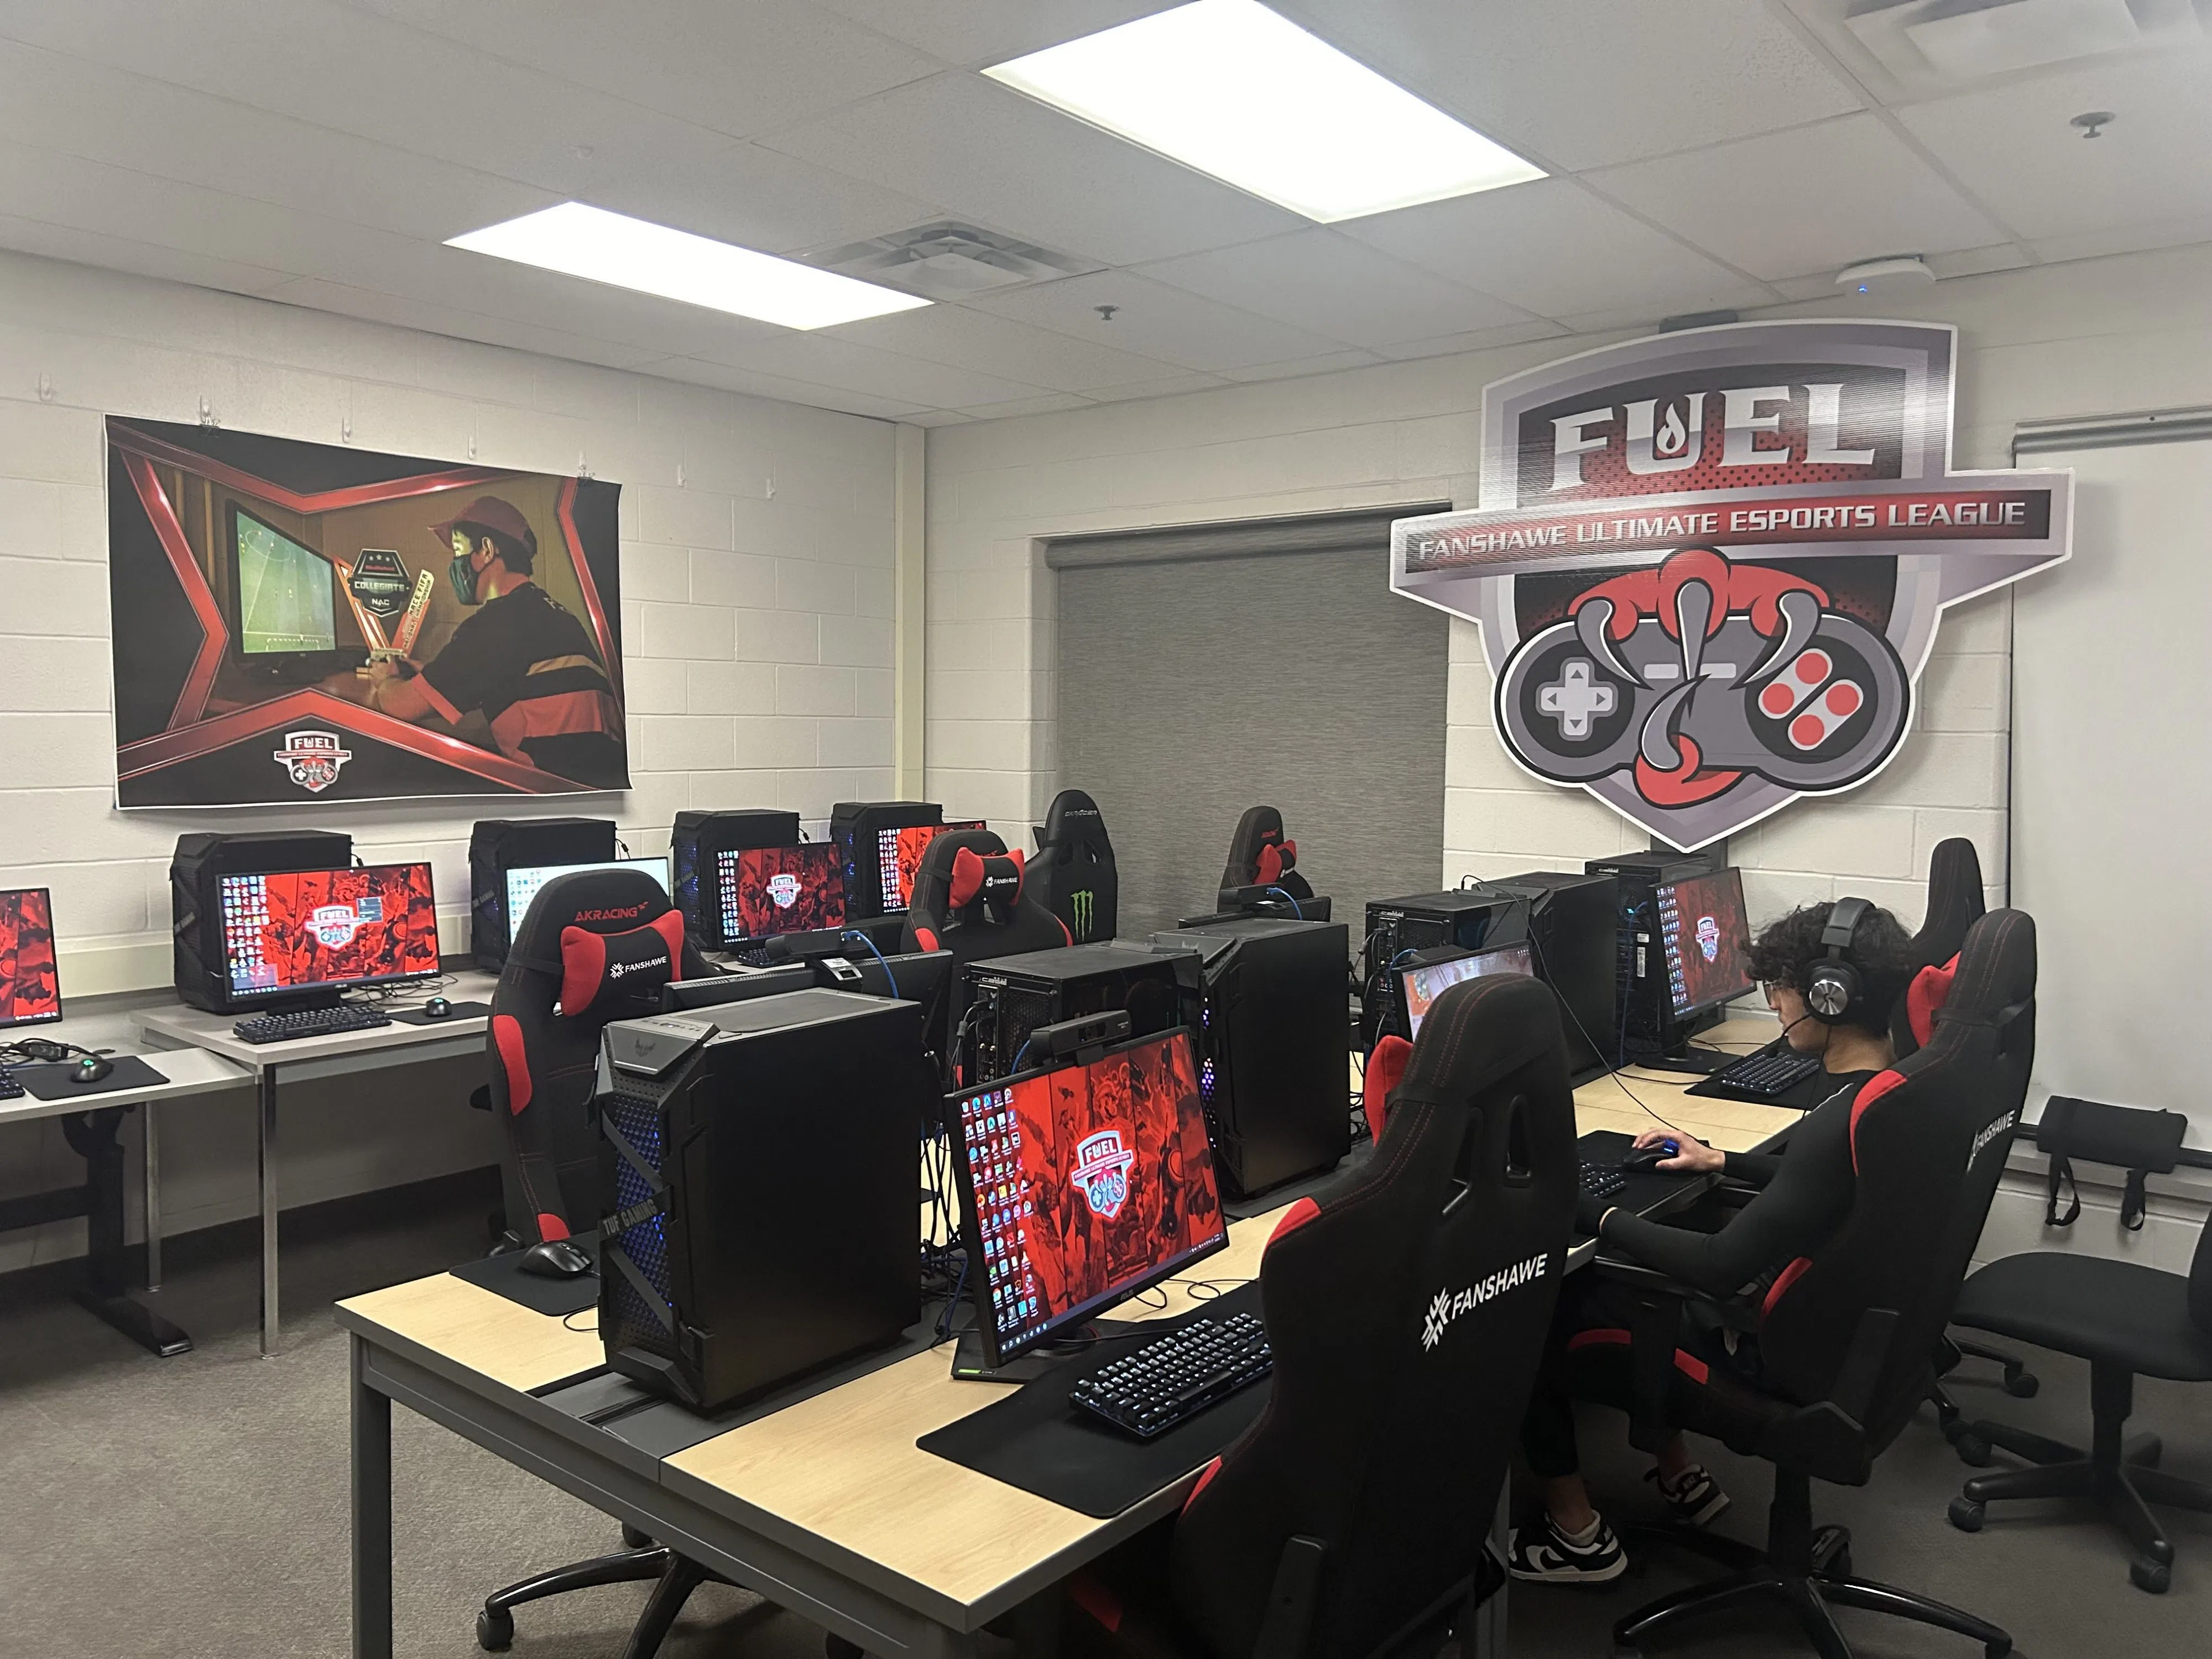 Fanshawe's E-Sports league and how gaming together supports Students